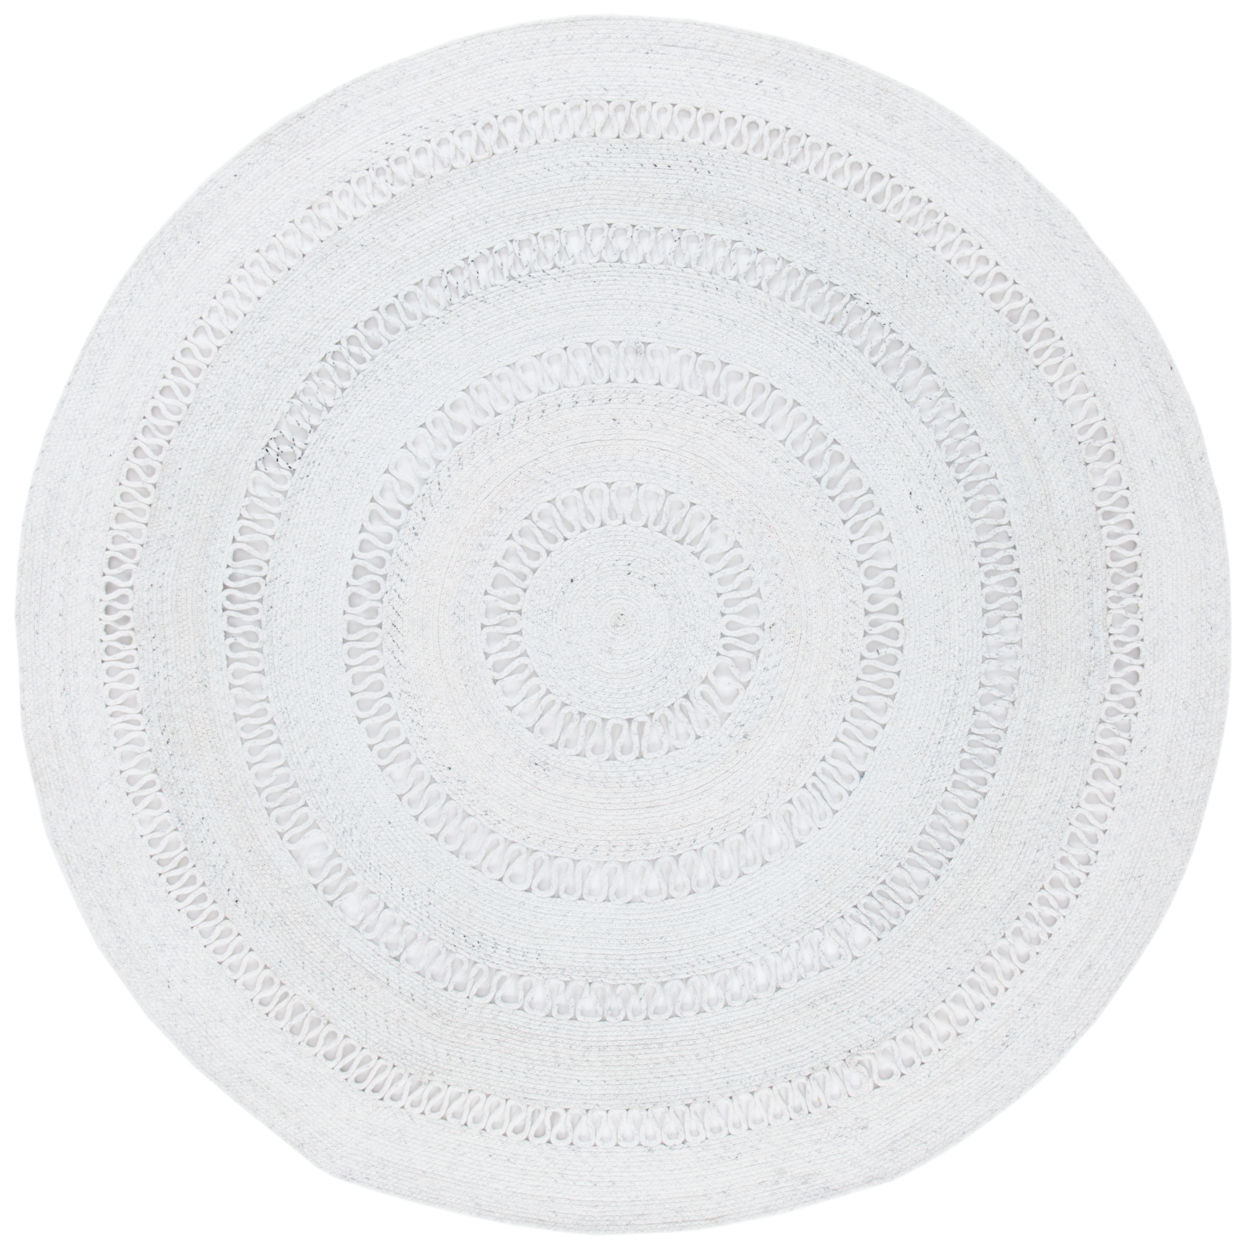 SAFAVIEH Cape Cod Collection CAP221A Handwoven Ivory Rug - 6' Round